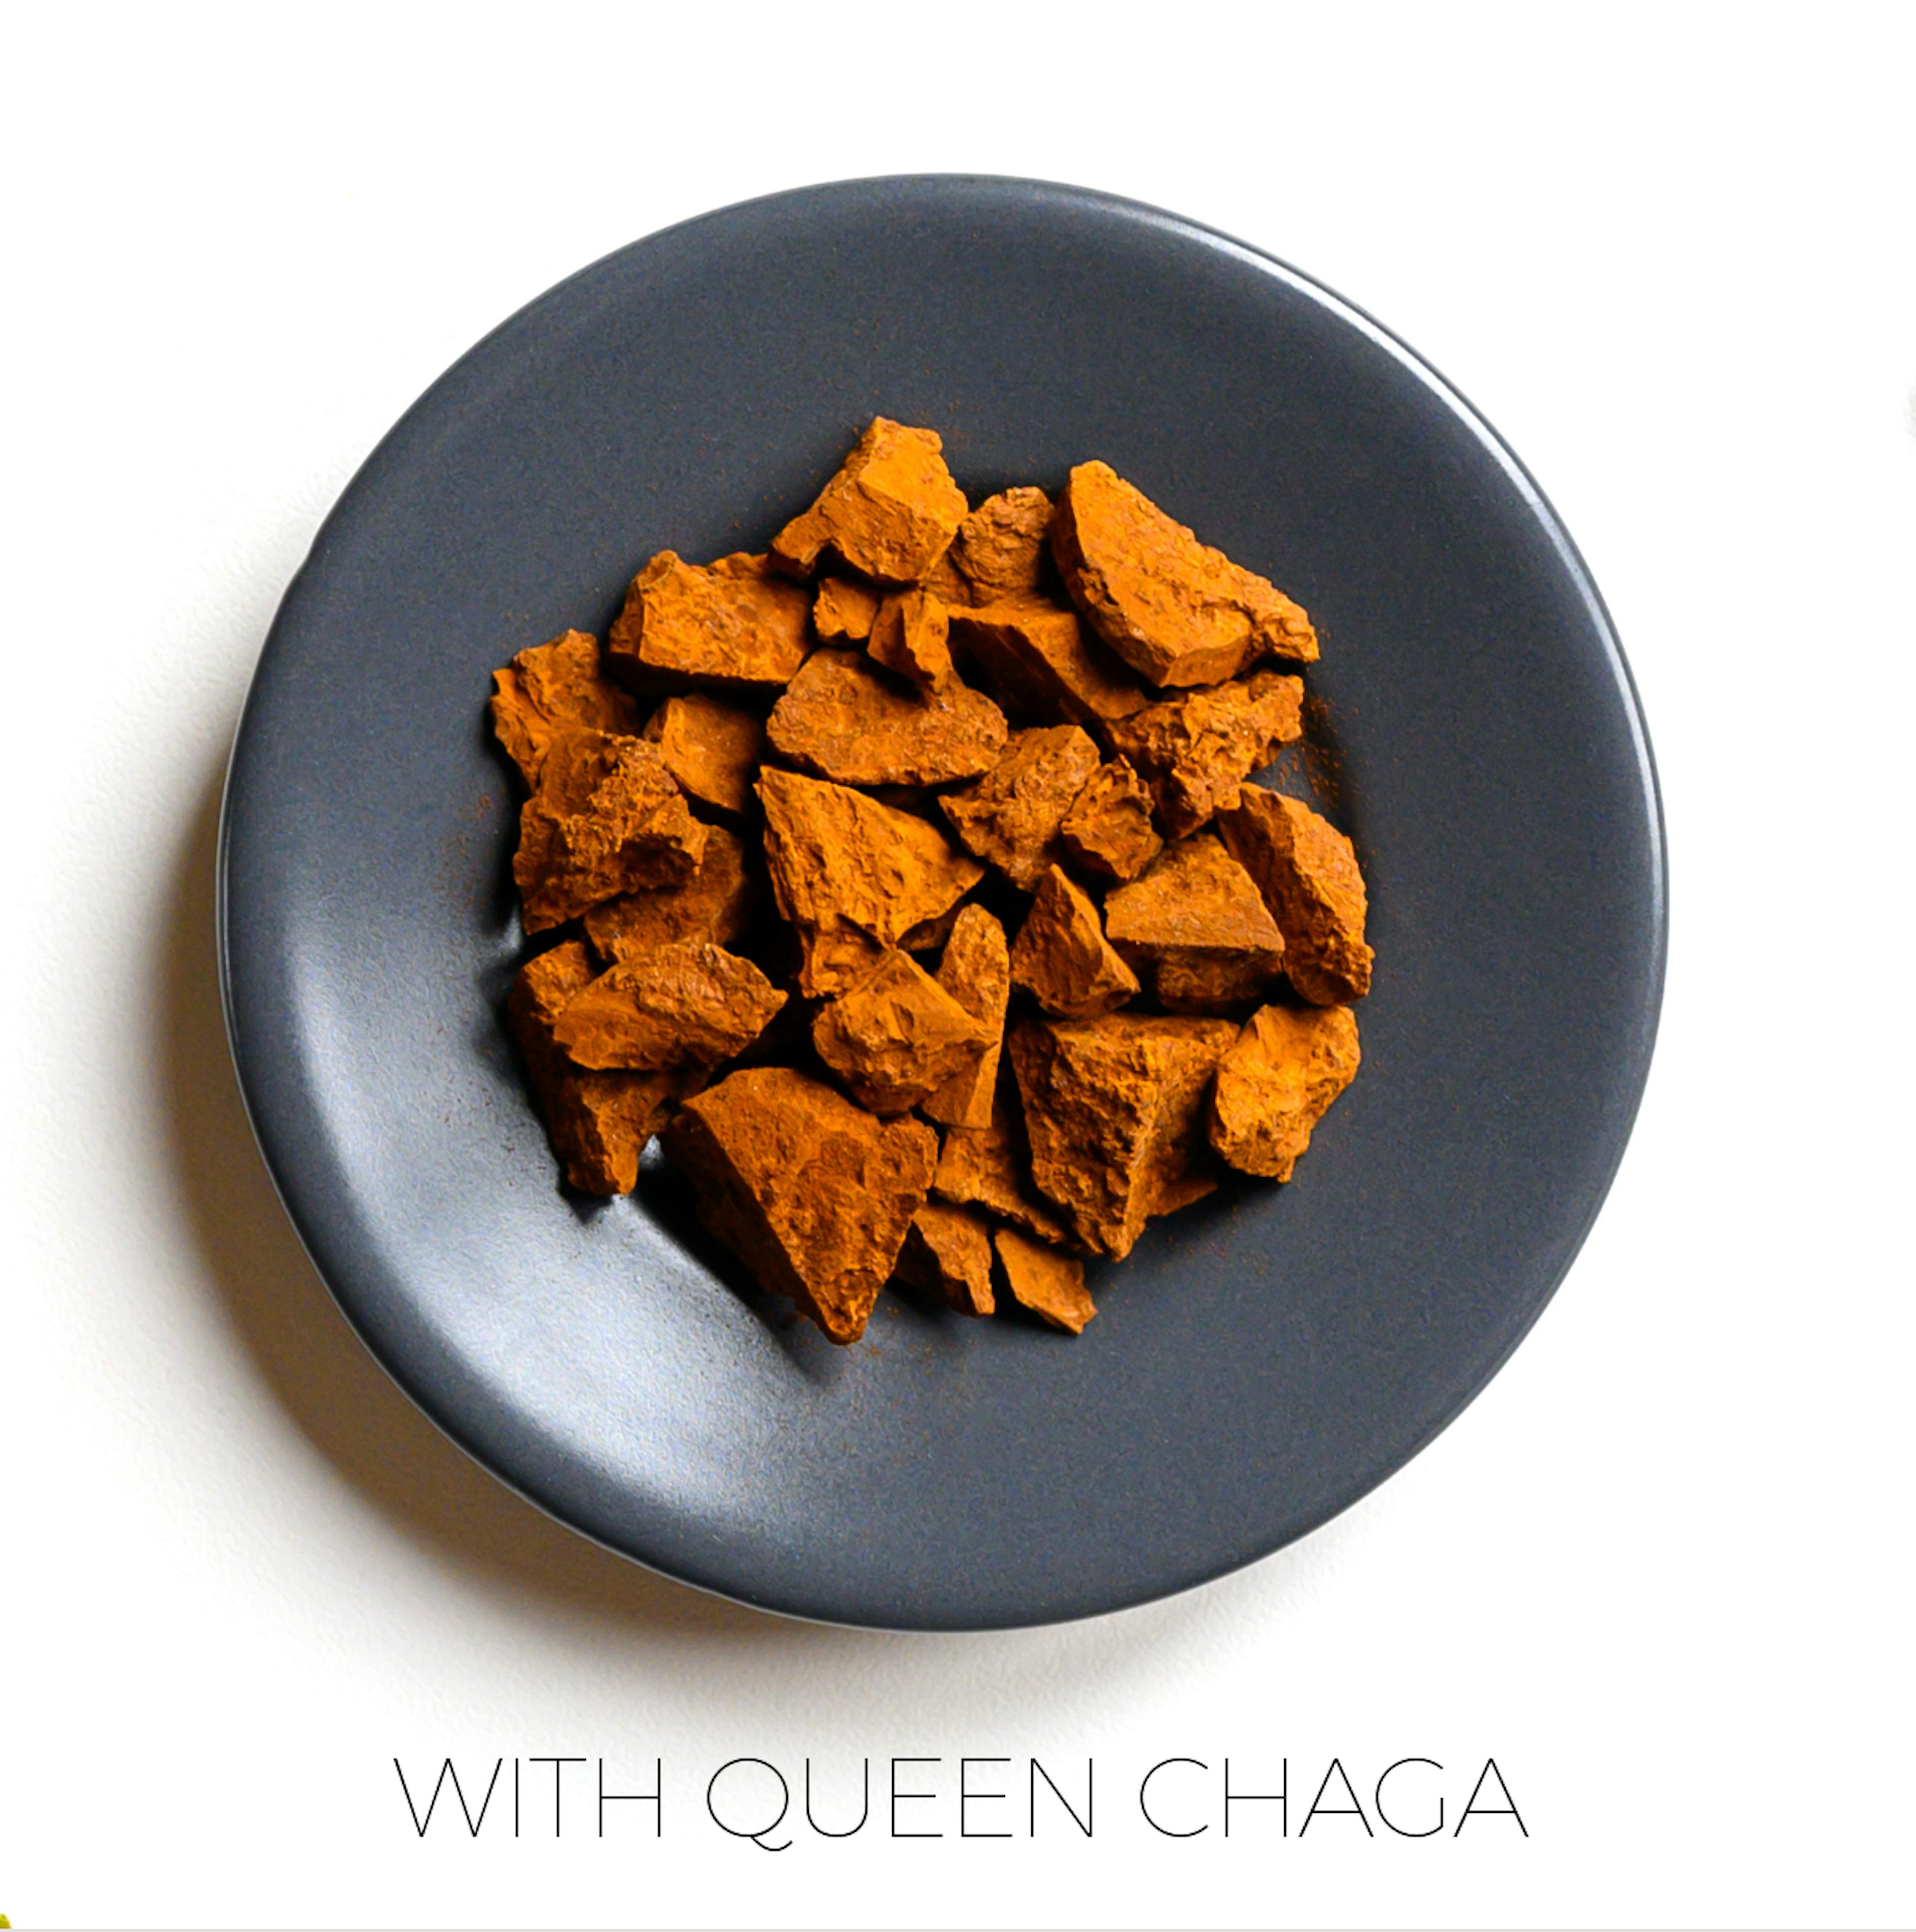 Go Glow | Organic Instant Coffee | Chaga and Chanterelle | 10 Servings